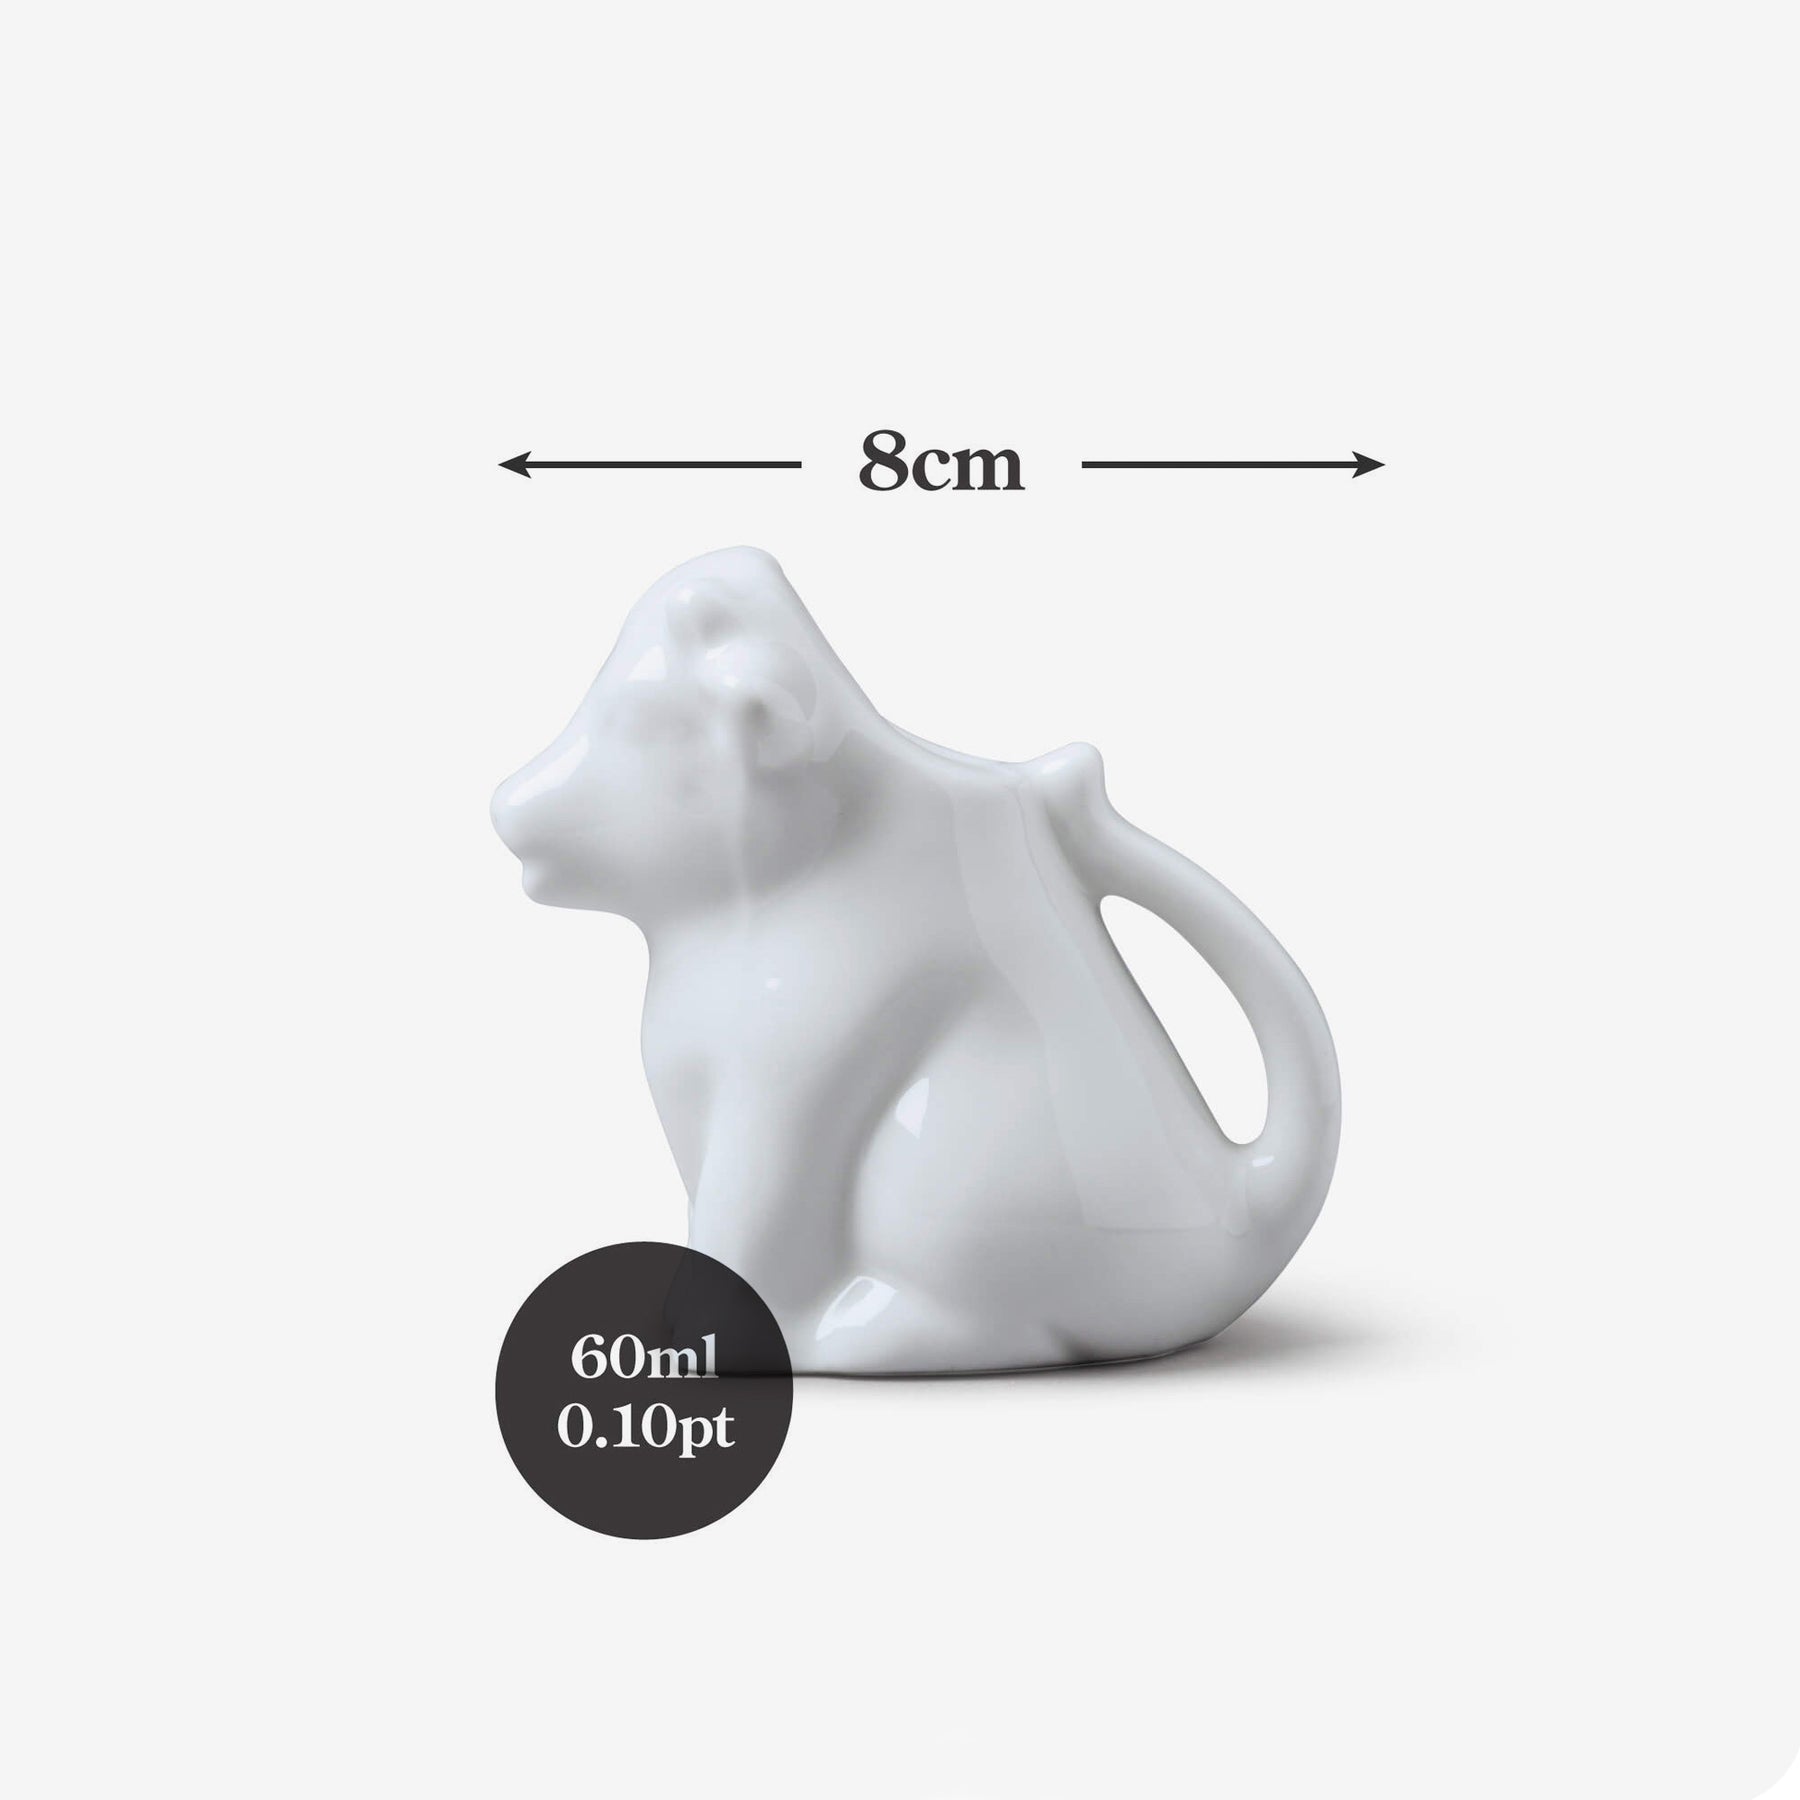 Porcelain Cow Milk Creamer Jug, Available in 2 Sizes